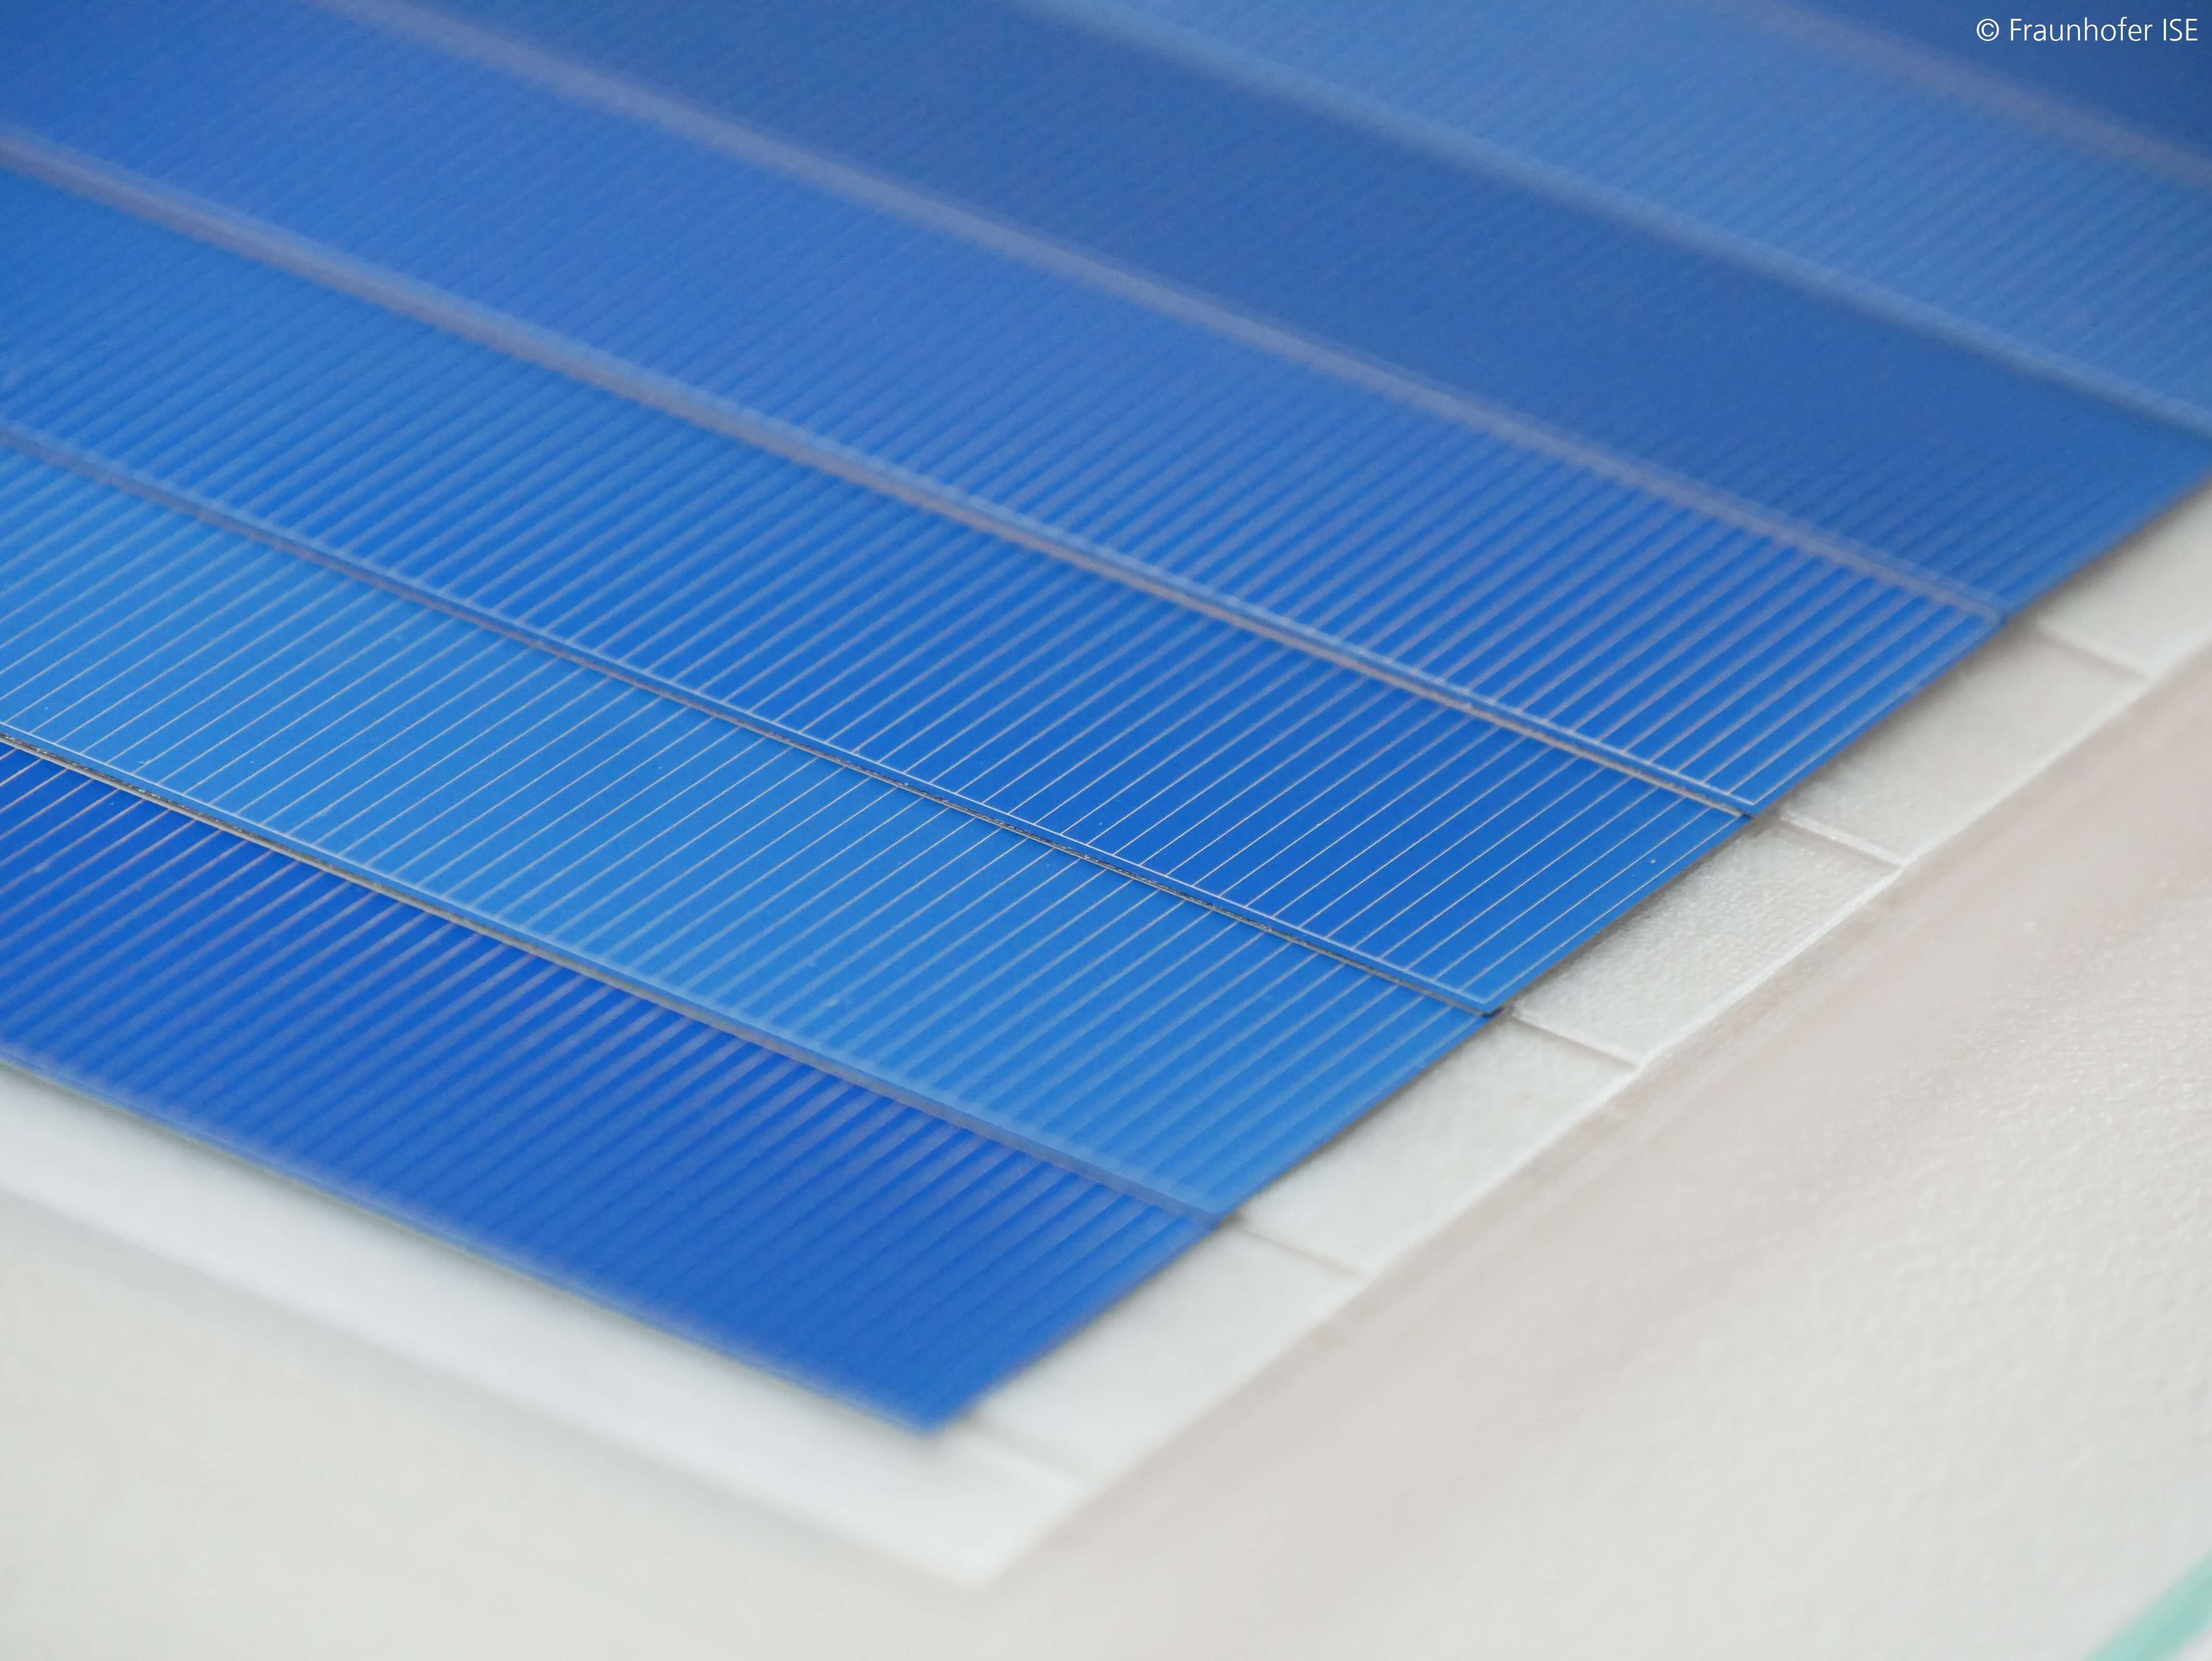 Interconnected shingle solar cells on a structured encapsulation foil optimized for the "SlimLine" process.